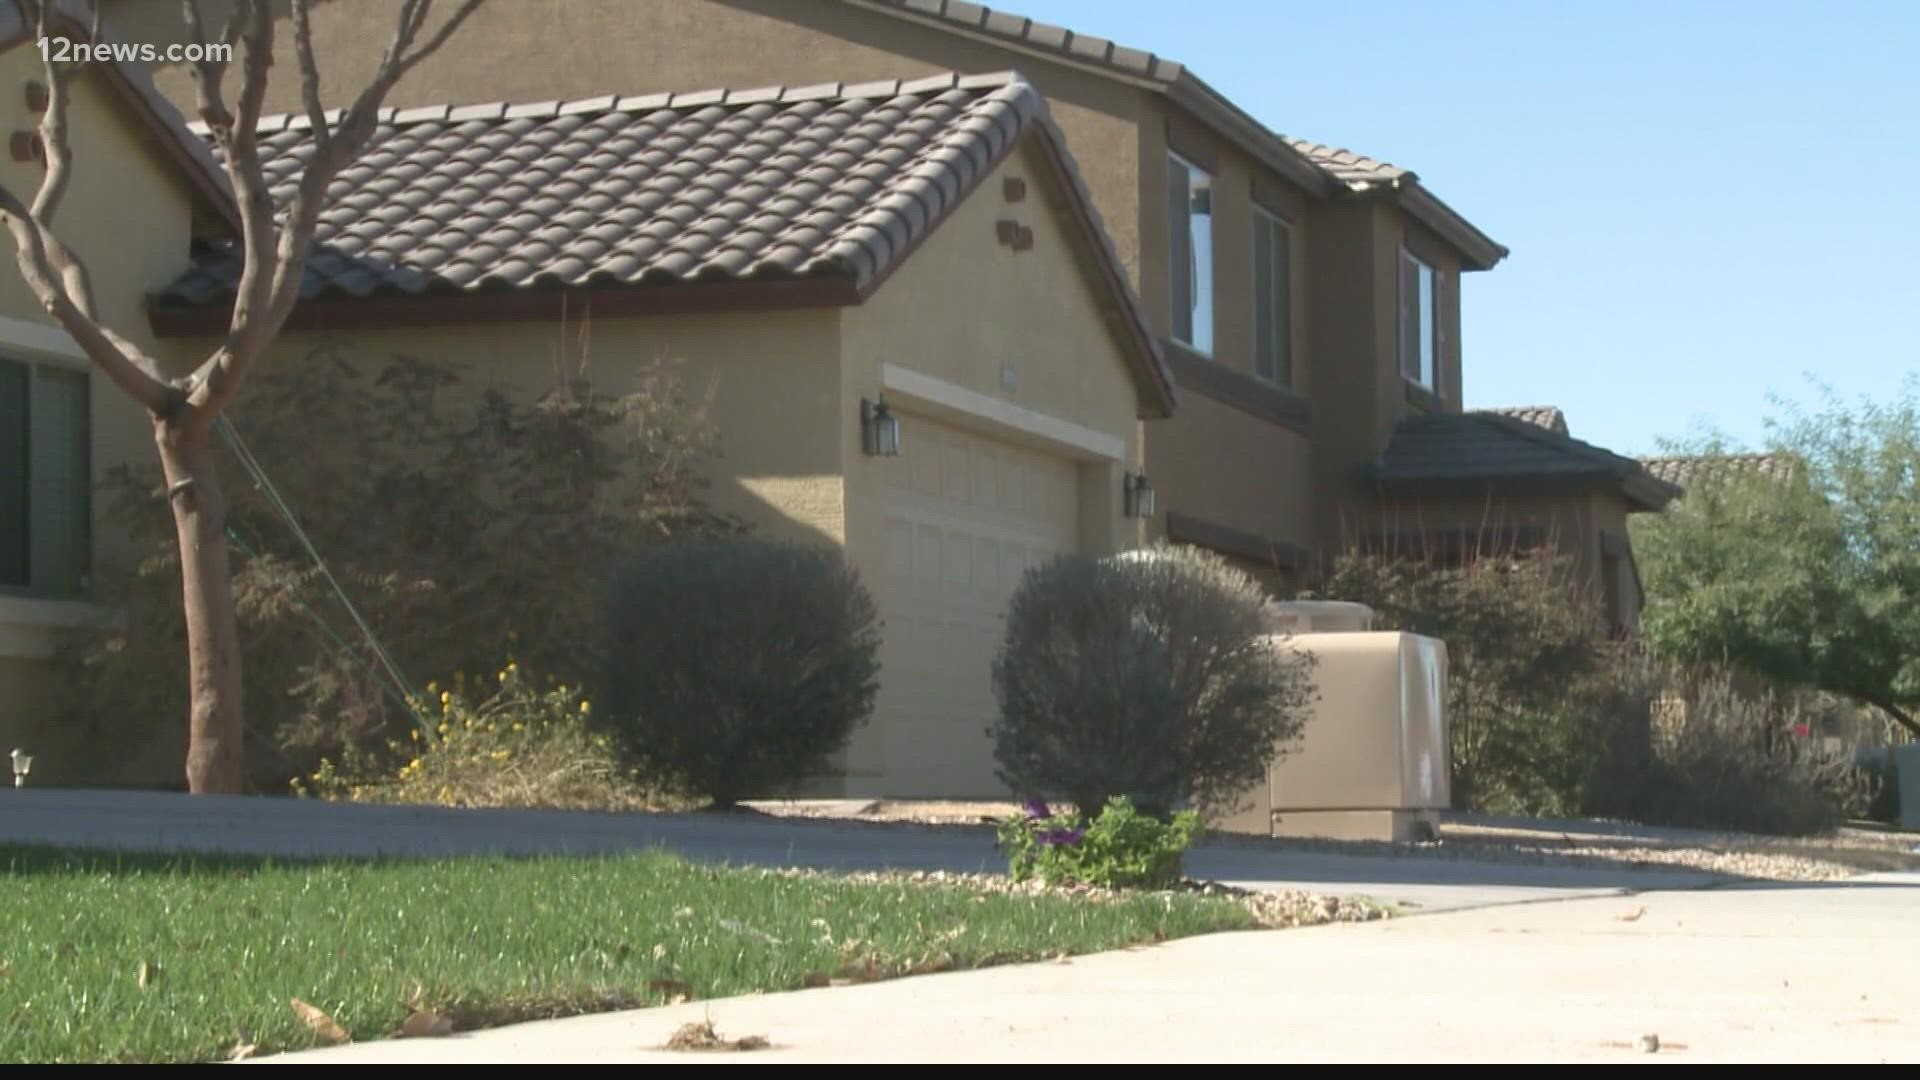 The typical price for a home in the Phoenix area could reach $500,000 within the next year. But is it sustainable? Experts weigh in.